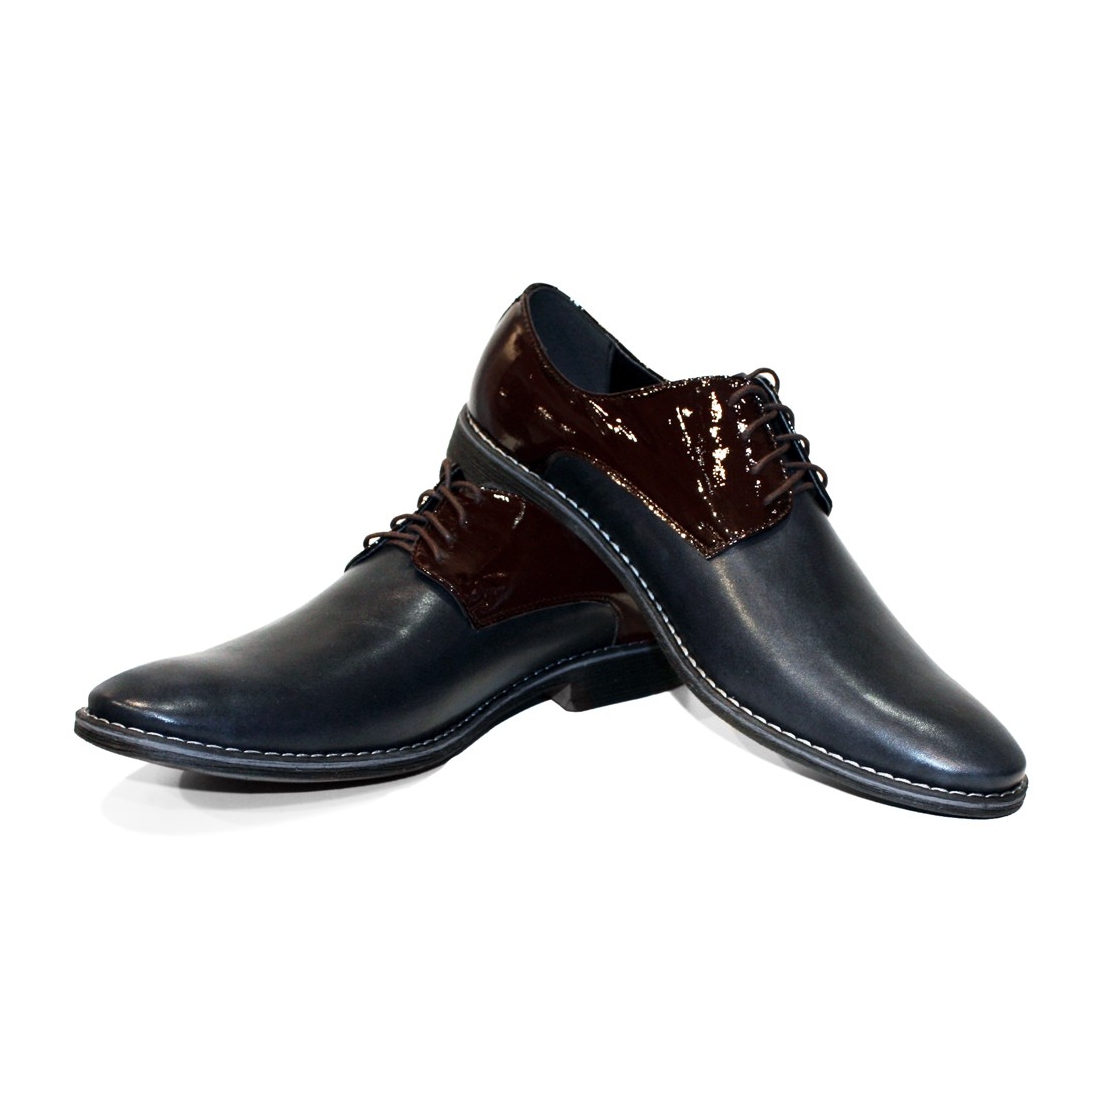 Modello Burono - Navy Blue Lace-Up Oxfords Dress Shoes - Cowhide Smooth ...